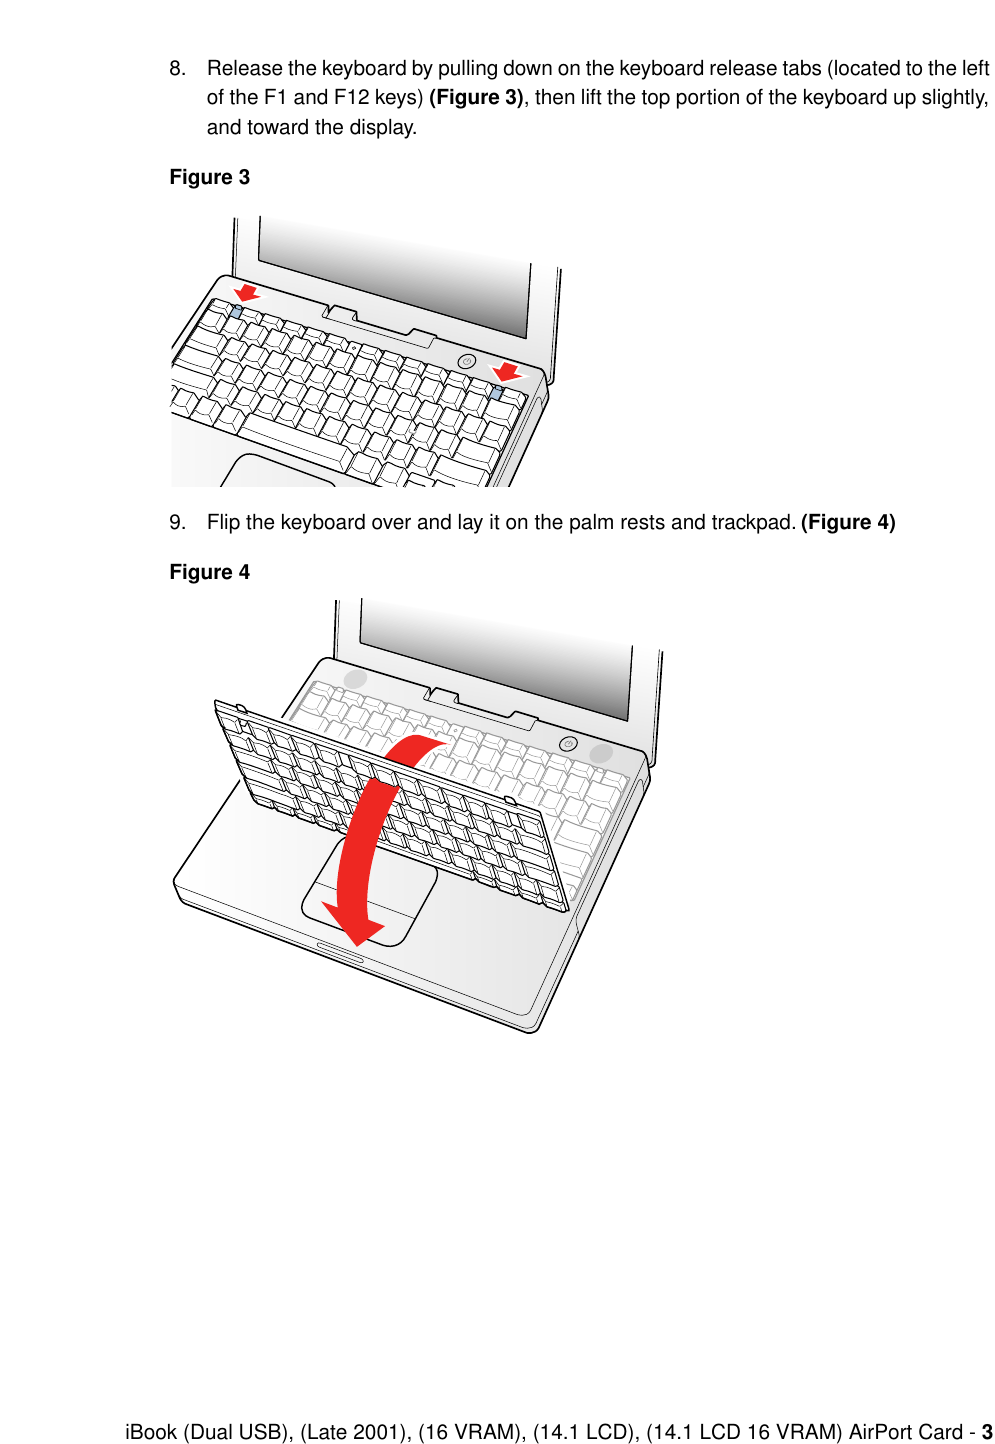  iBook (Dual USB), (Late 2001), (16 VRAM), (14.1 LCD), (14.1 LCD 16 VRAM) AirPort Card -  3 8. Release the keyboard by pulling down on the keyboard release tabs (located to the left of the F1 and F12 keys)  (Figure 3) , then lift the top portion of the keyboard up slightly, and toward the display. Figure 3 9. Flip the keyboard over and lay it on the palm rests and trackpad.  (Figure 4)Figure 4